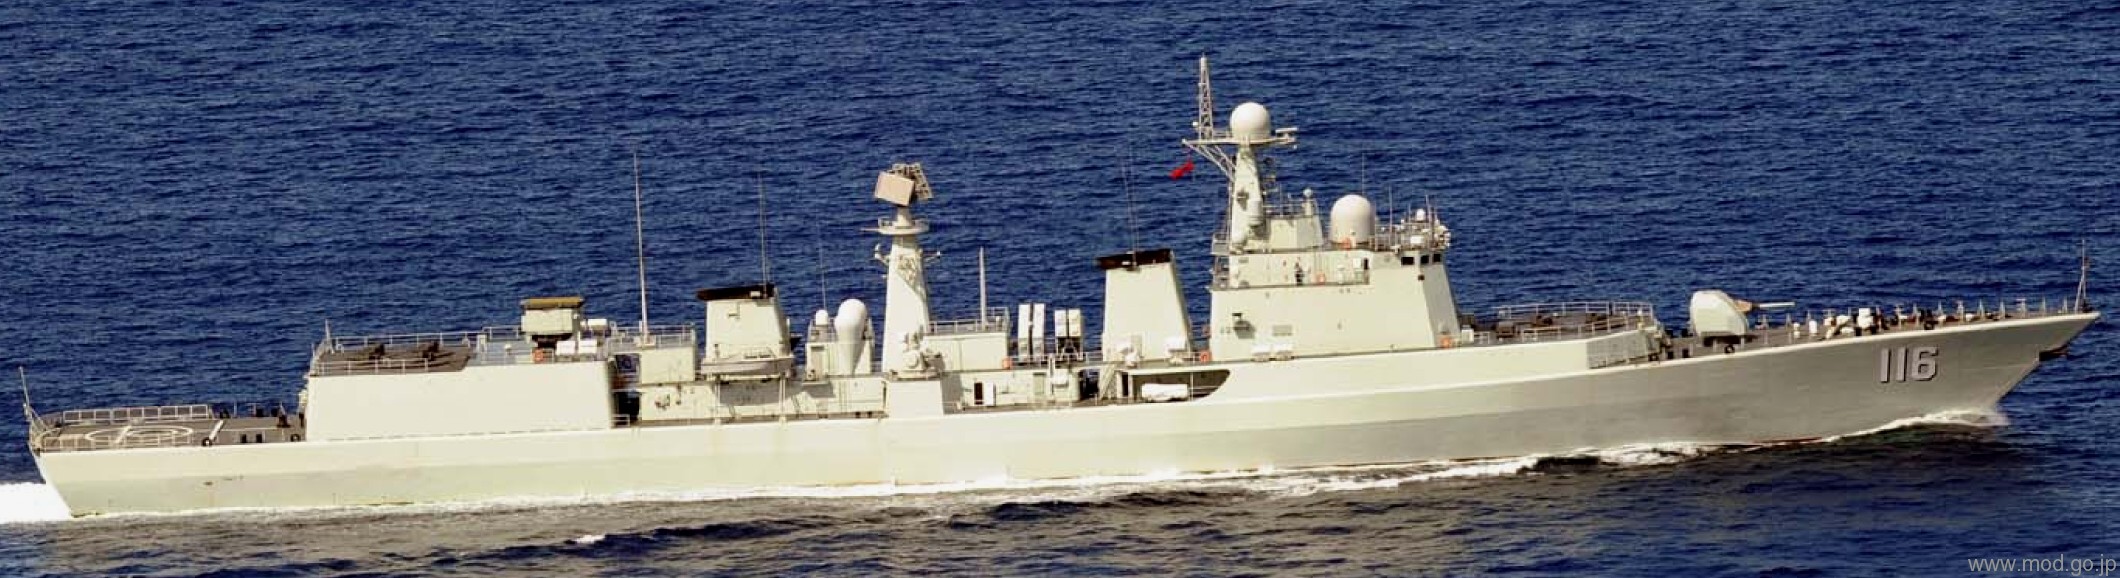 type 051c luzhou class guided missile destroyer people's liberation army navy china plans ddg-116 shijiazhuang 02